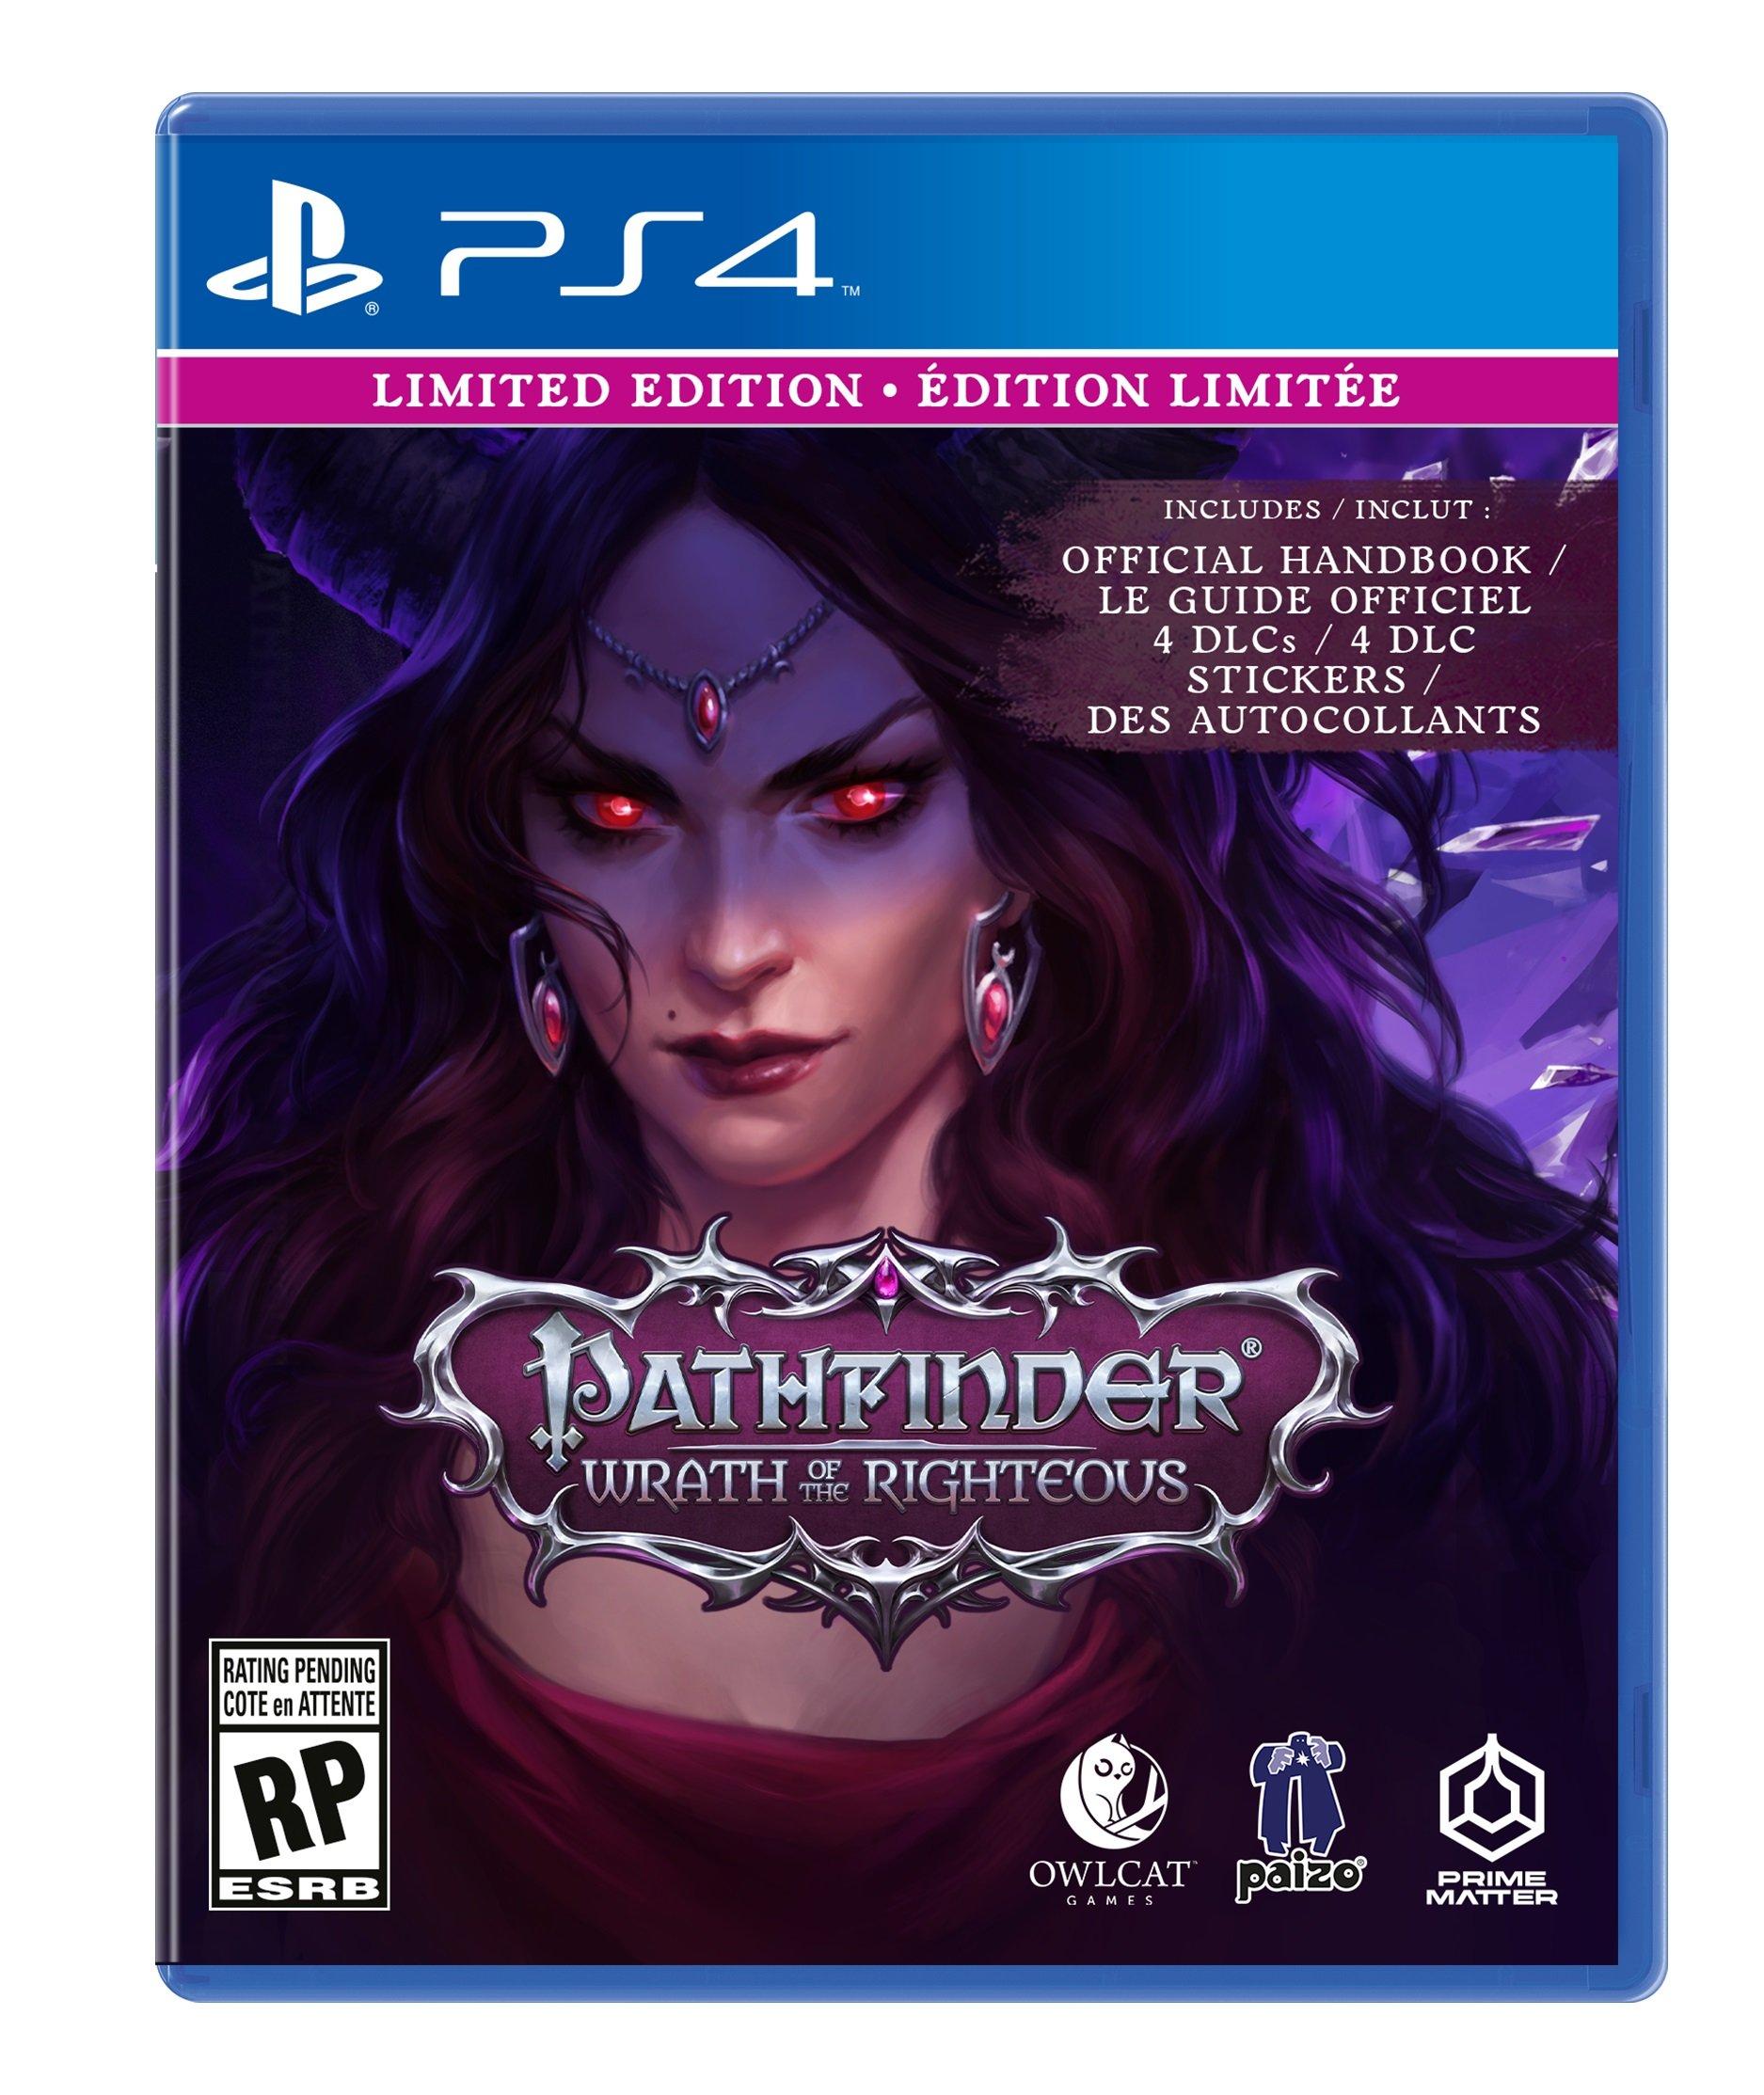 Pathfinder: Wrath of the Righteousness